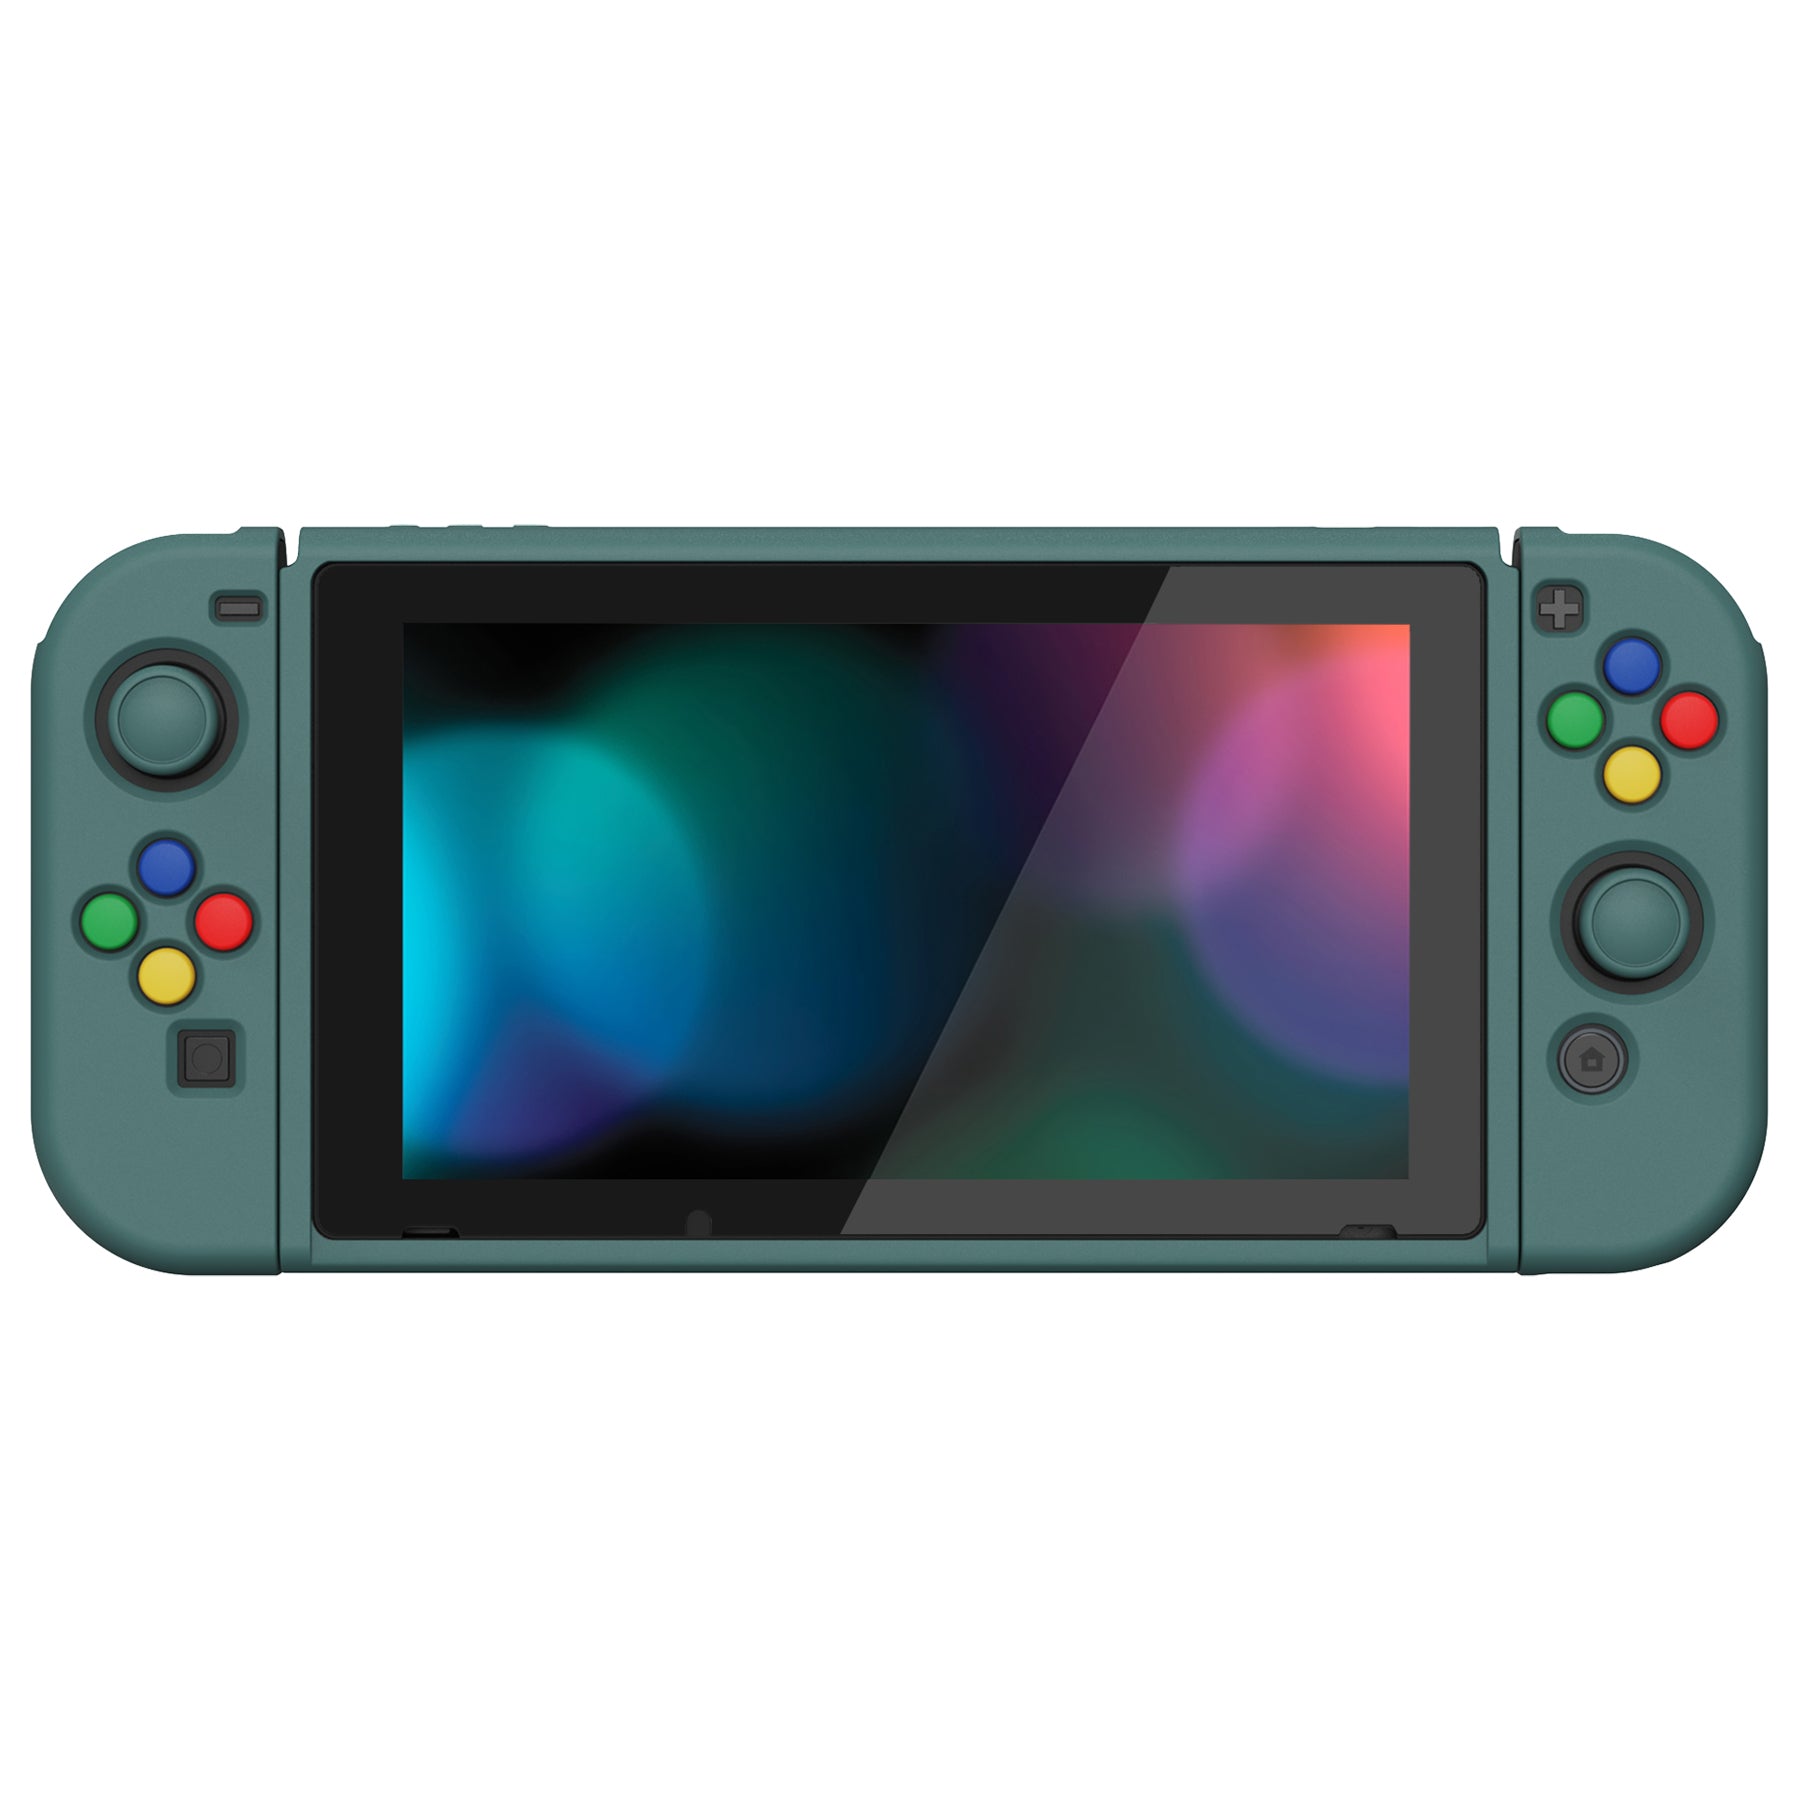 PlayVital ZealProtect Soft Protective Case for Nintendo Switch, Flexible Cover for Switch with Tempered Glass Screen Protector & Thumb Grips & ABXY Direction Button Caps - Hunter Green - RNSYM5008 playvital